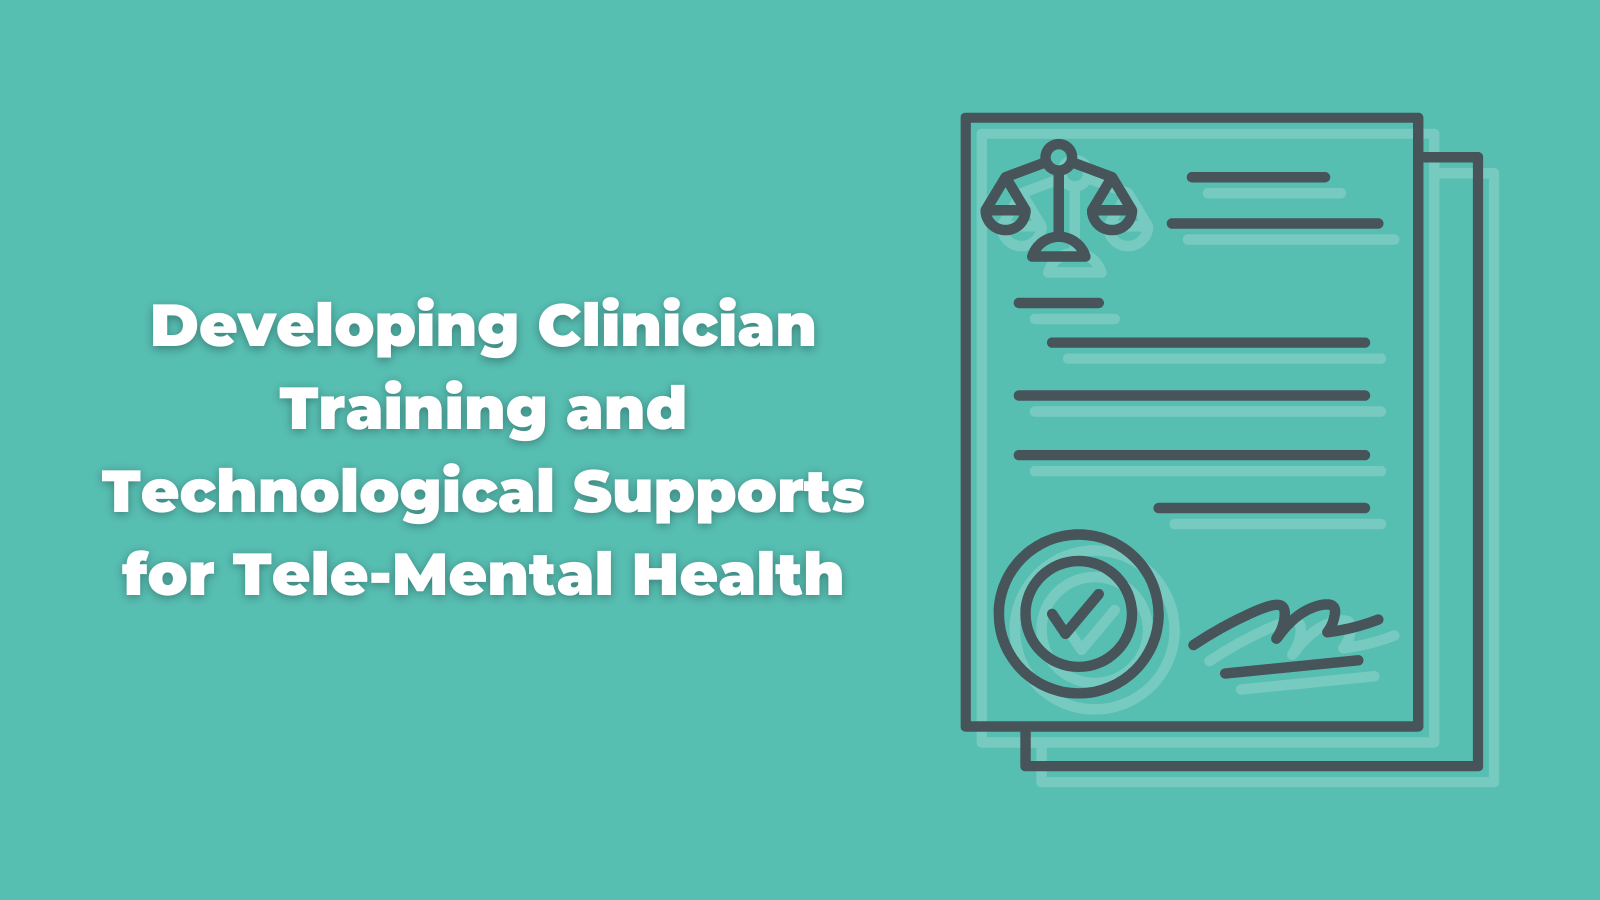 Developing Clinician Training and Technological Supports for Tele-Mental Health